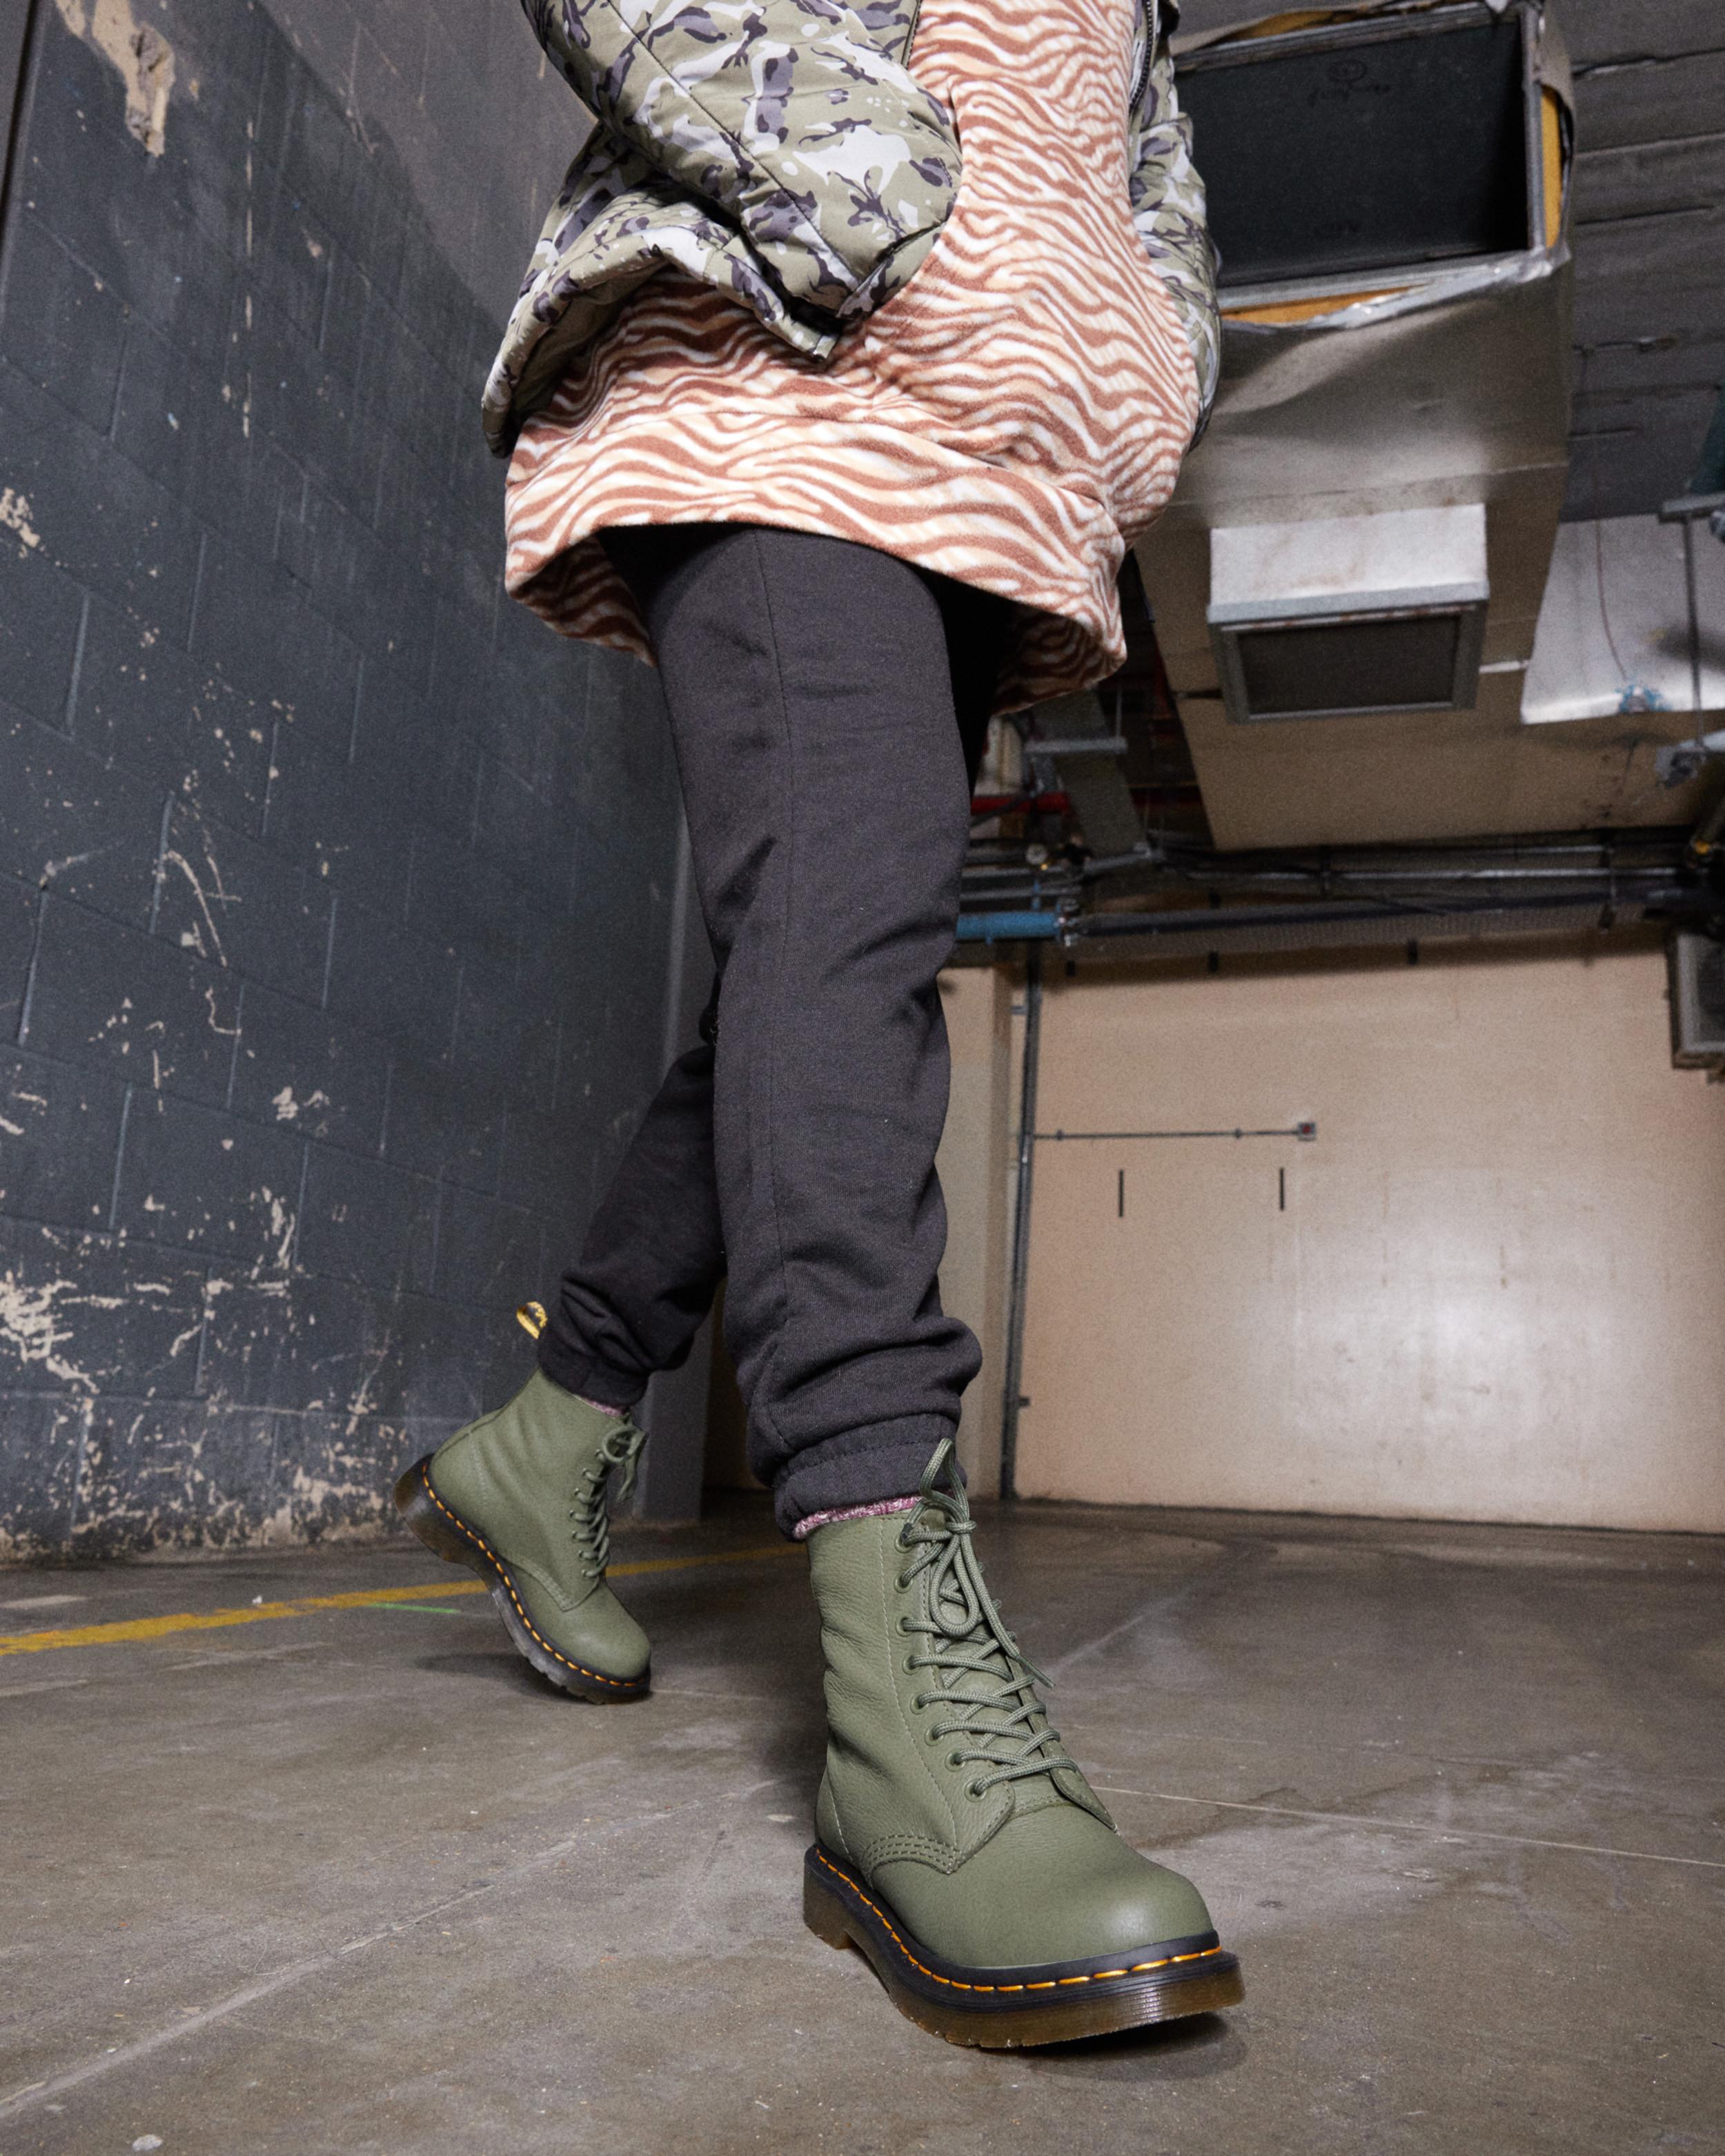 SCARPY  Dr martens hiver sport my 1460 pascal pine green virginia